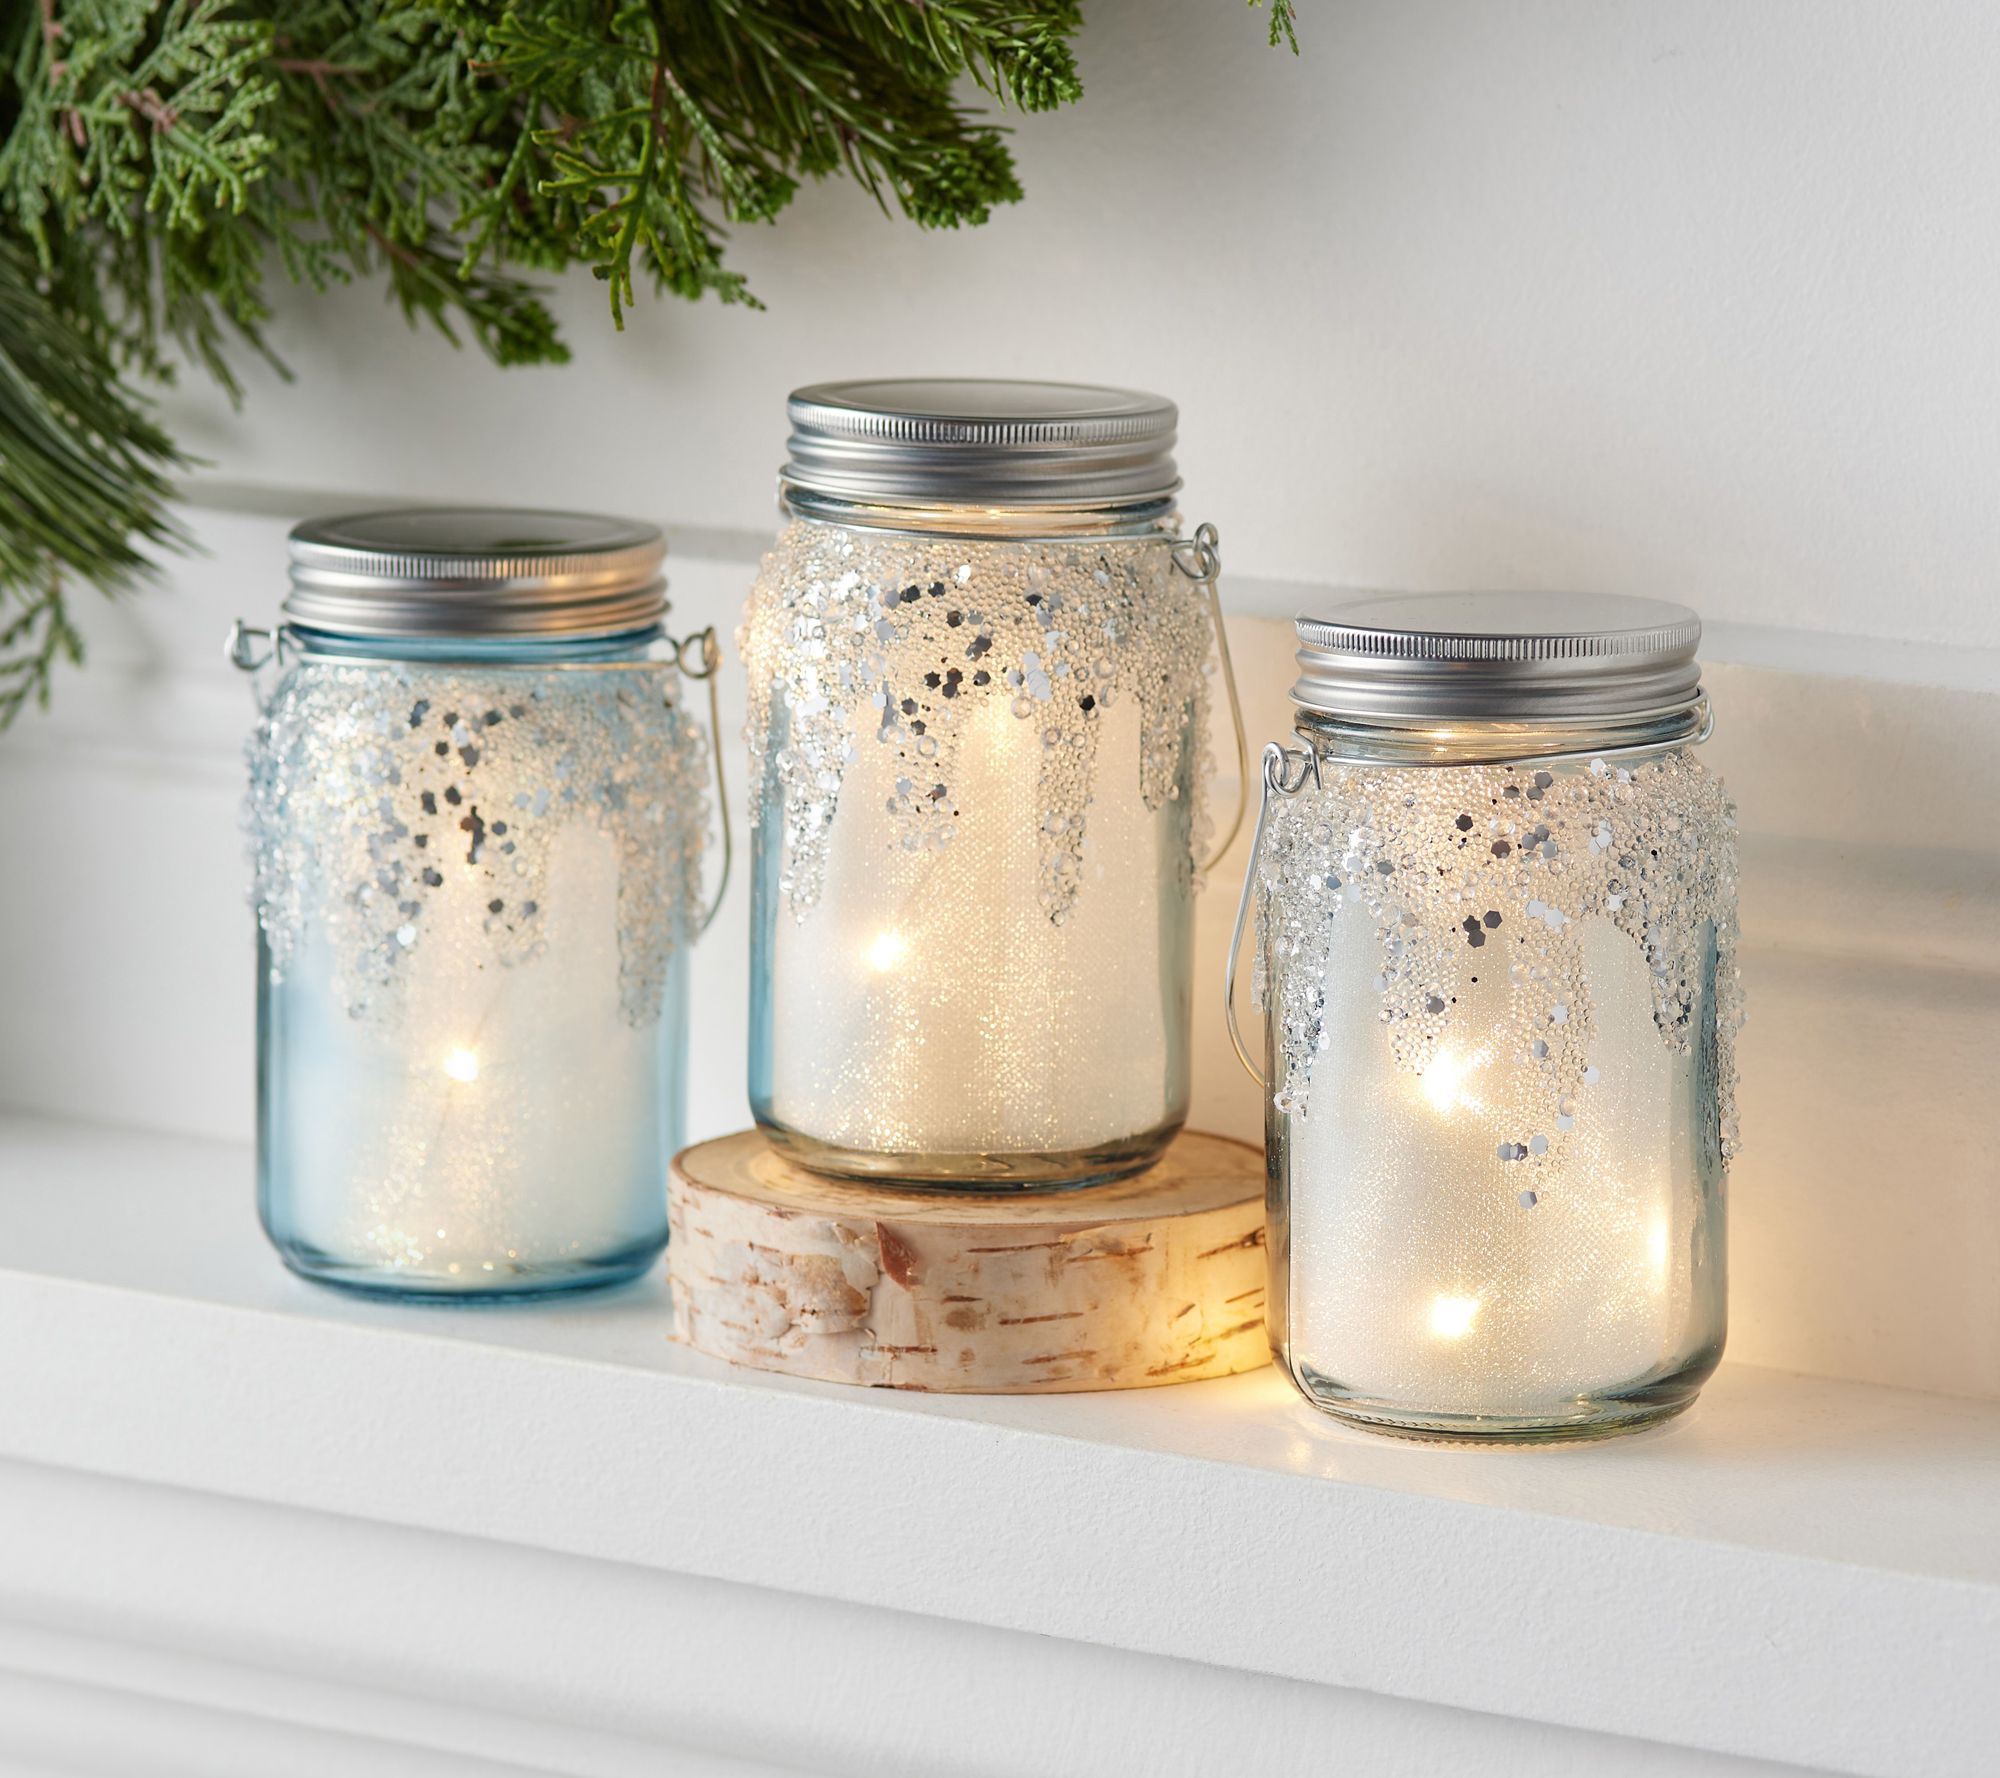 Mason Jar Crafts - The Happy Housewife™ :: Home Management